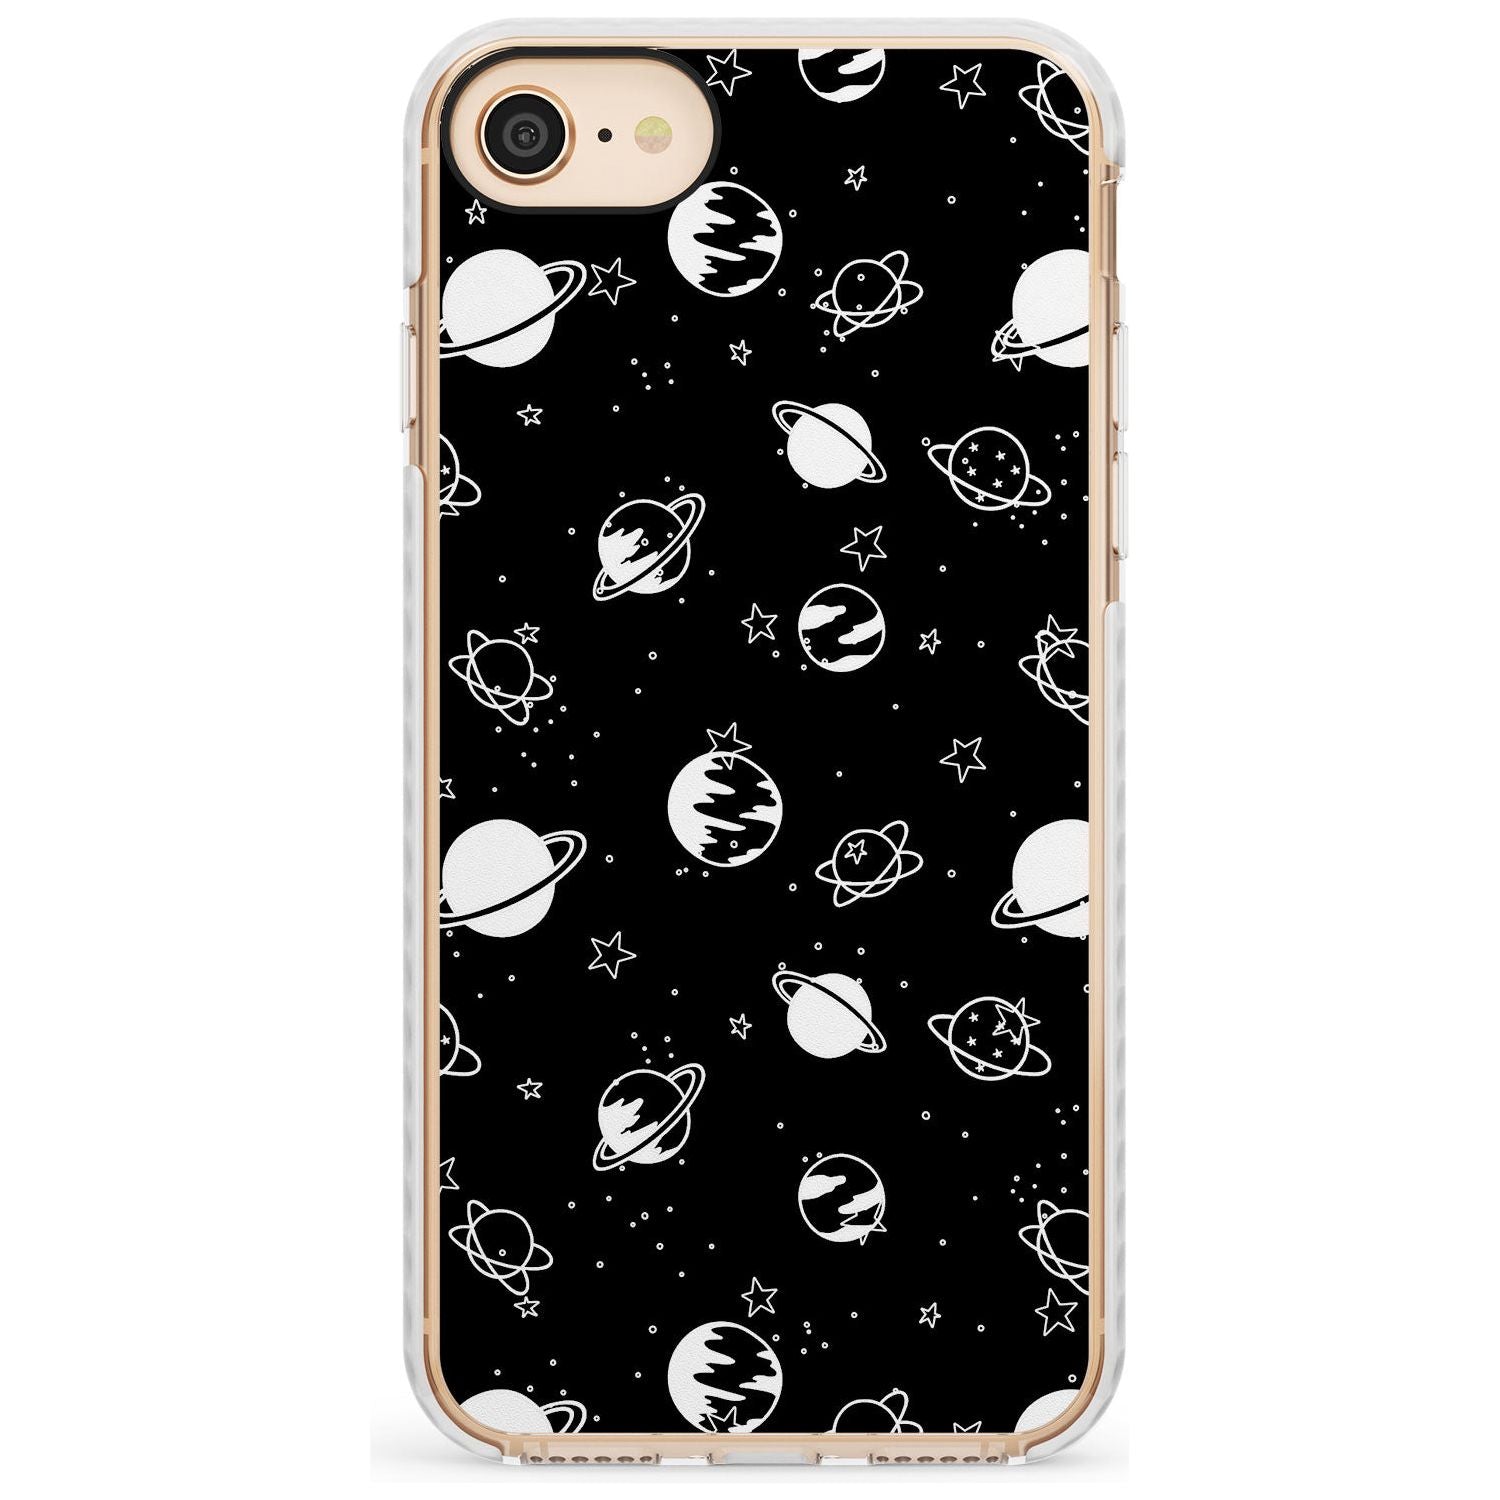 White Planets on Black Slim TPU Phone Case for iPhone SE 8 7 Plus